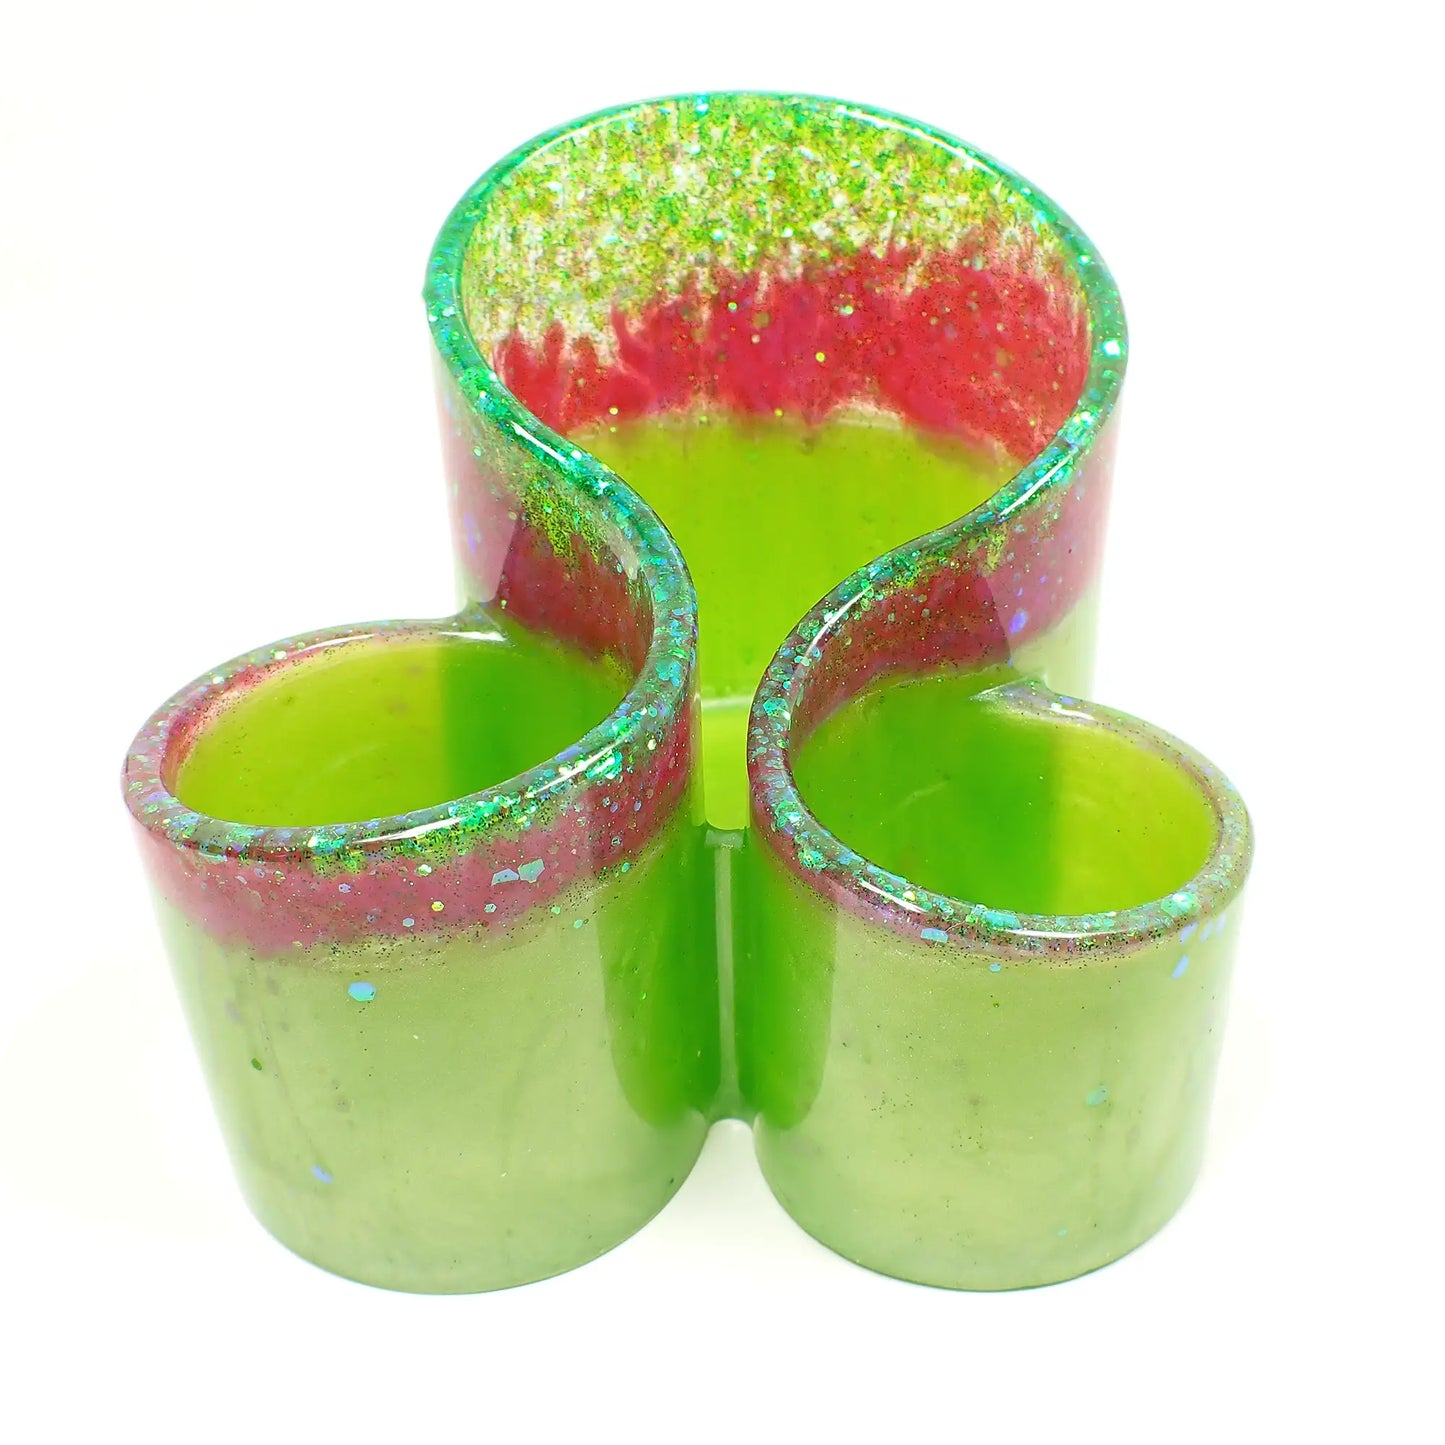 Handmade Lime Green and Pink Resin Makeup Brush Holder with Iridescent Glitter